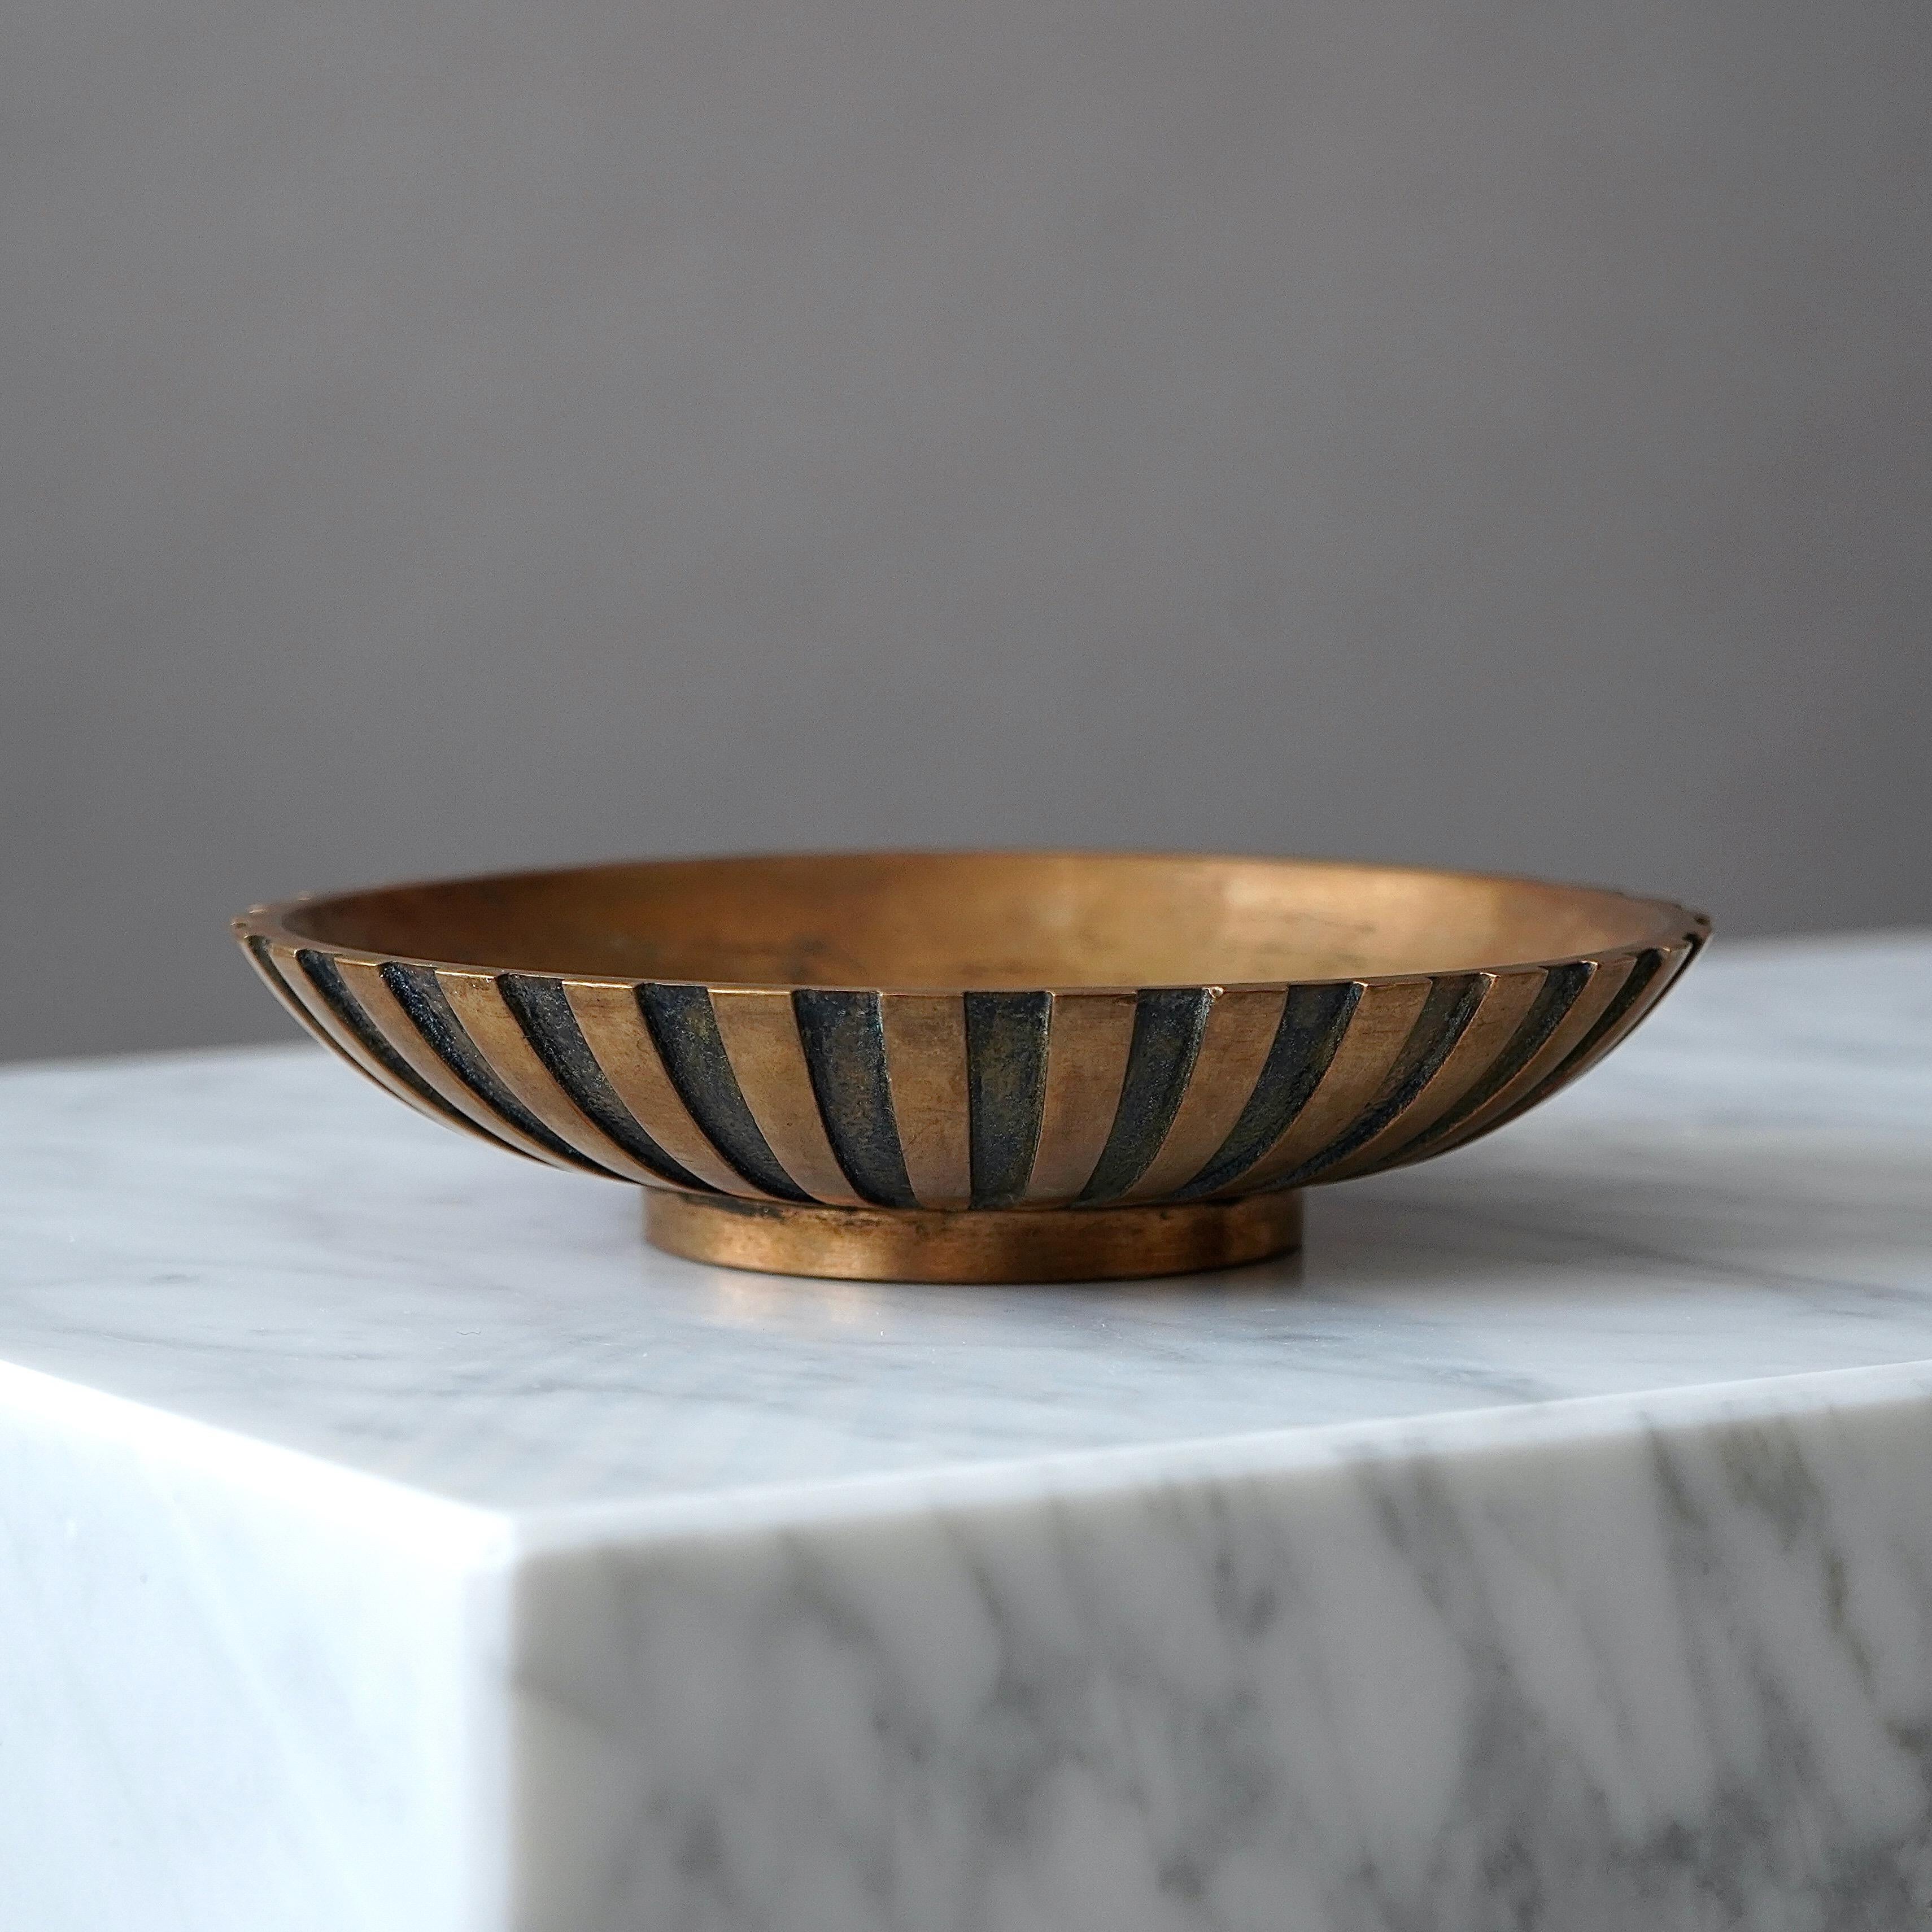 A small but beautiful art deco bronze bowl with amazing patina. 
Made by Tinos in Denmark, 1930s.

Great condition. 
Stamped 'TINOS', 'BRONCE' and 'MADE IN DENMARK'.